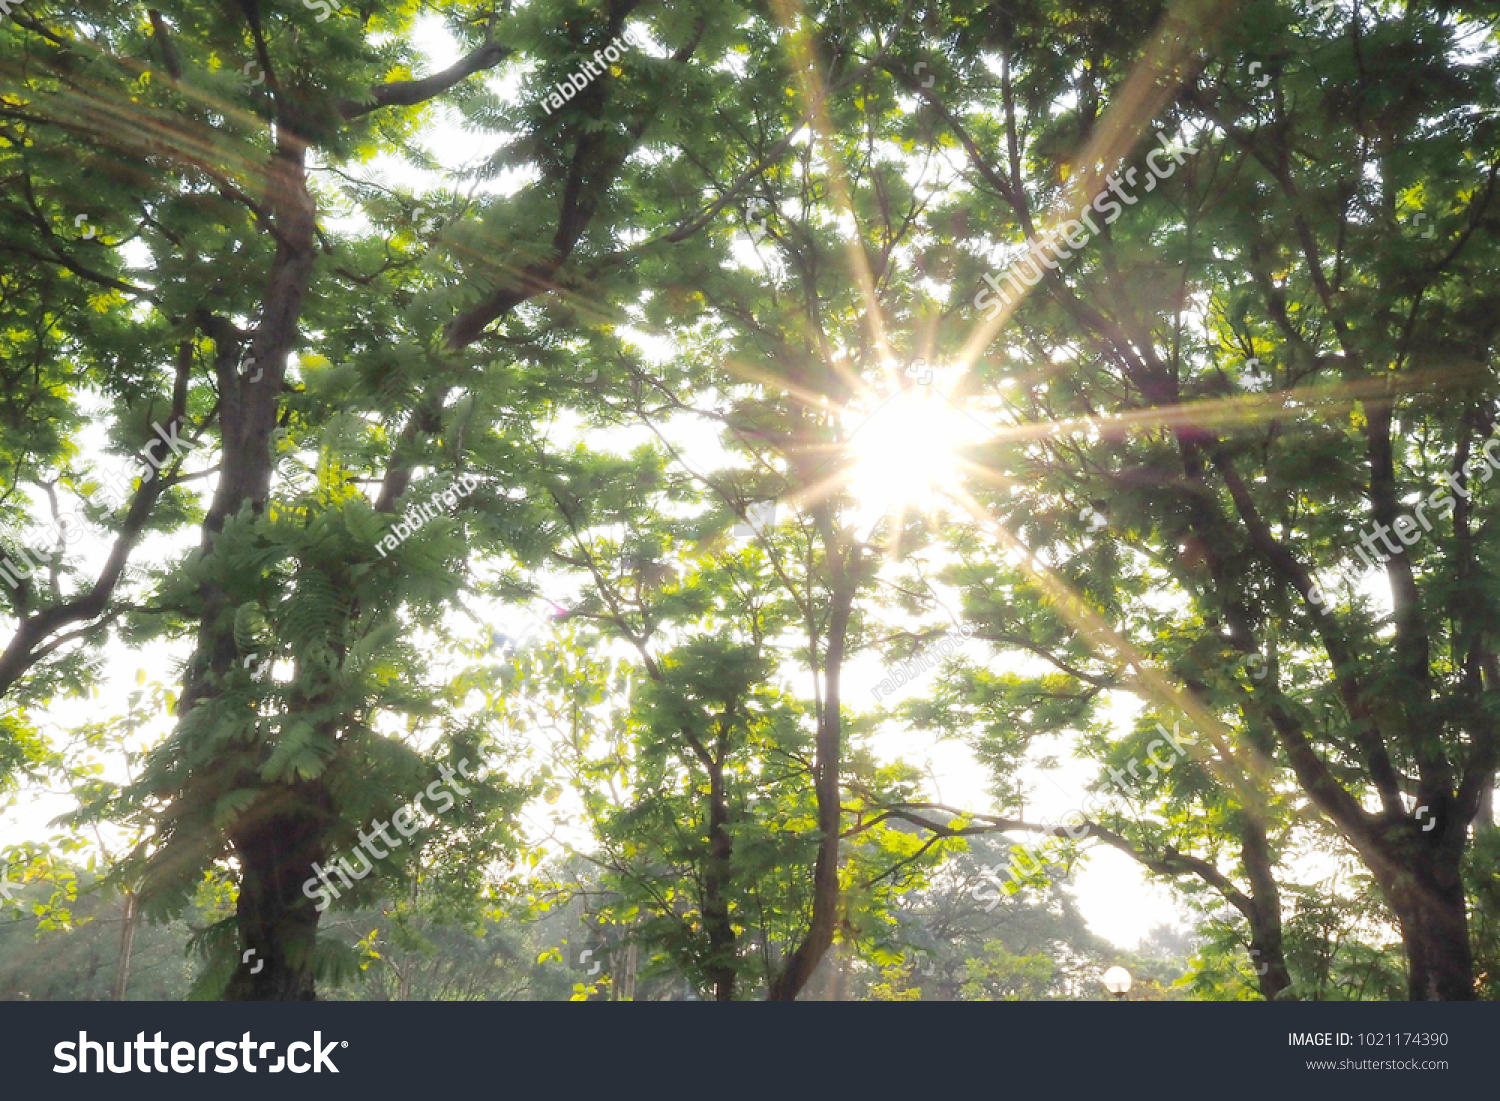 Light flare nature background,Shade and tranquility,Nature art green tree with leaves texture,Big tree in the garden. #1021174390